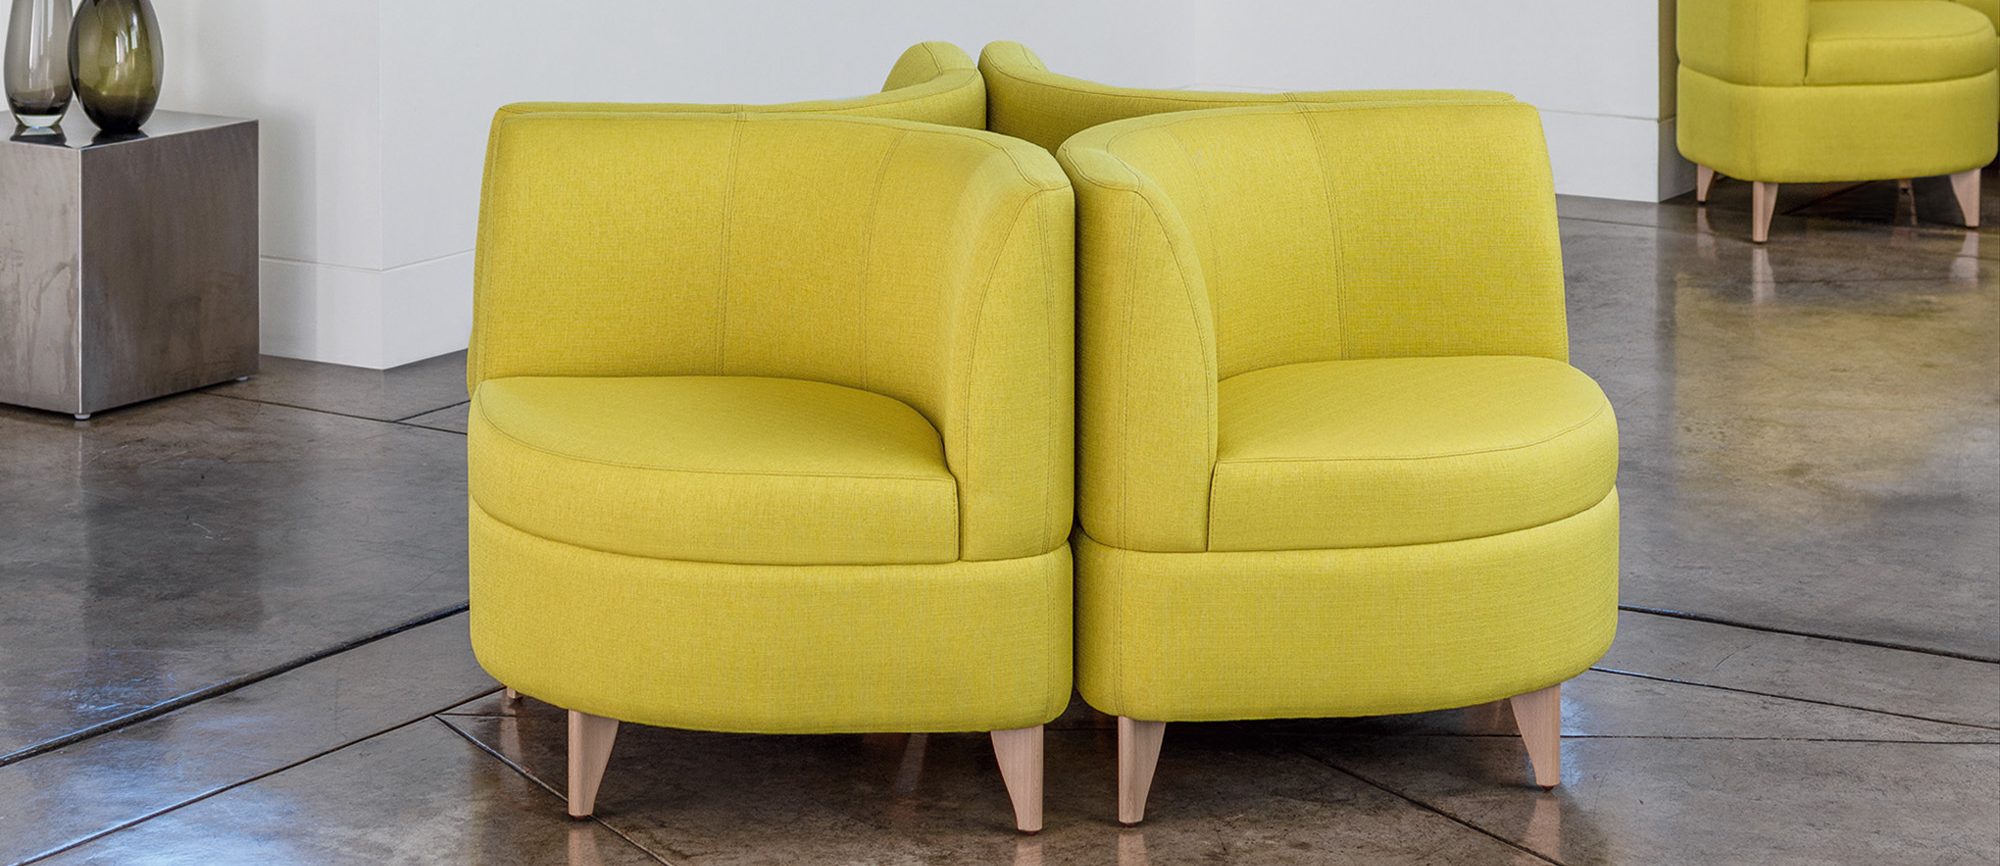 Yellow Leaf Lounge Chairs in Cluster